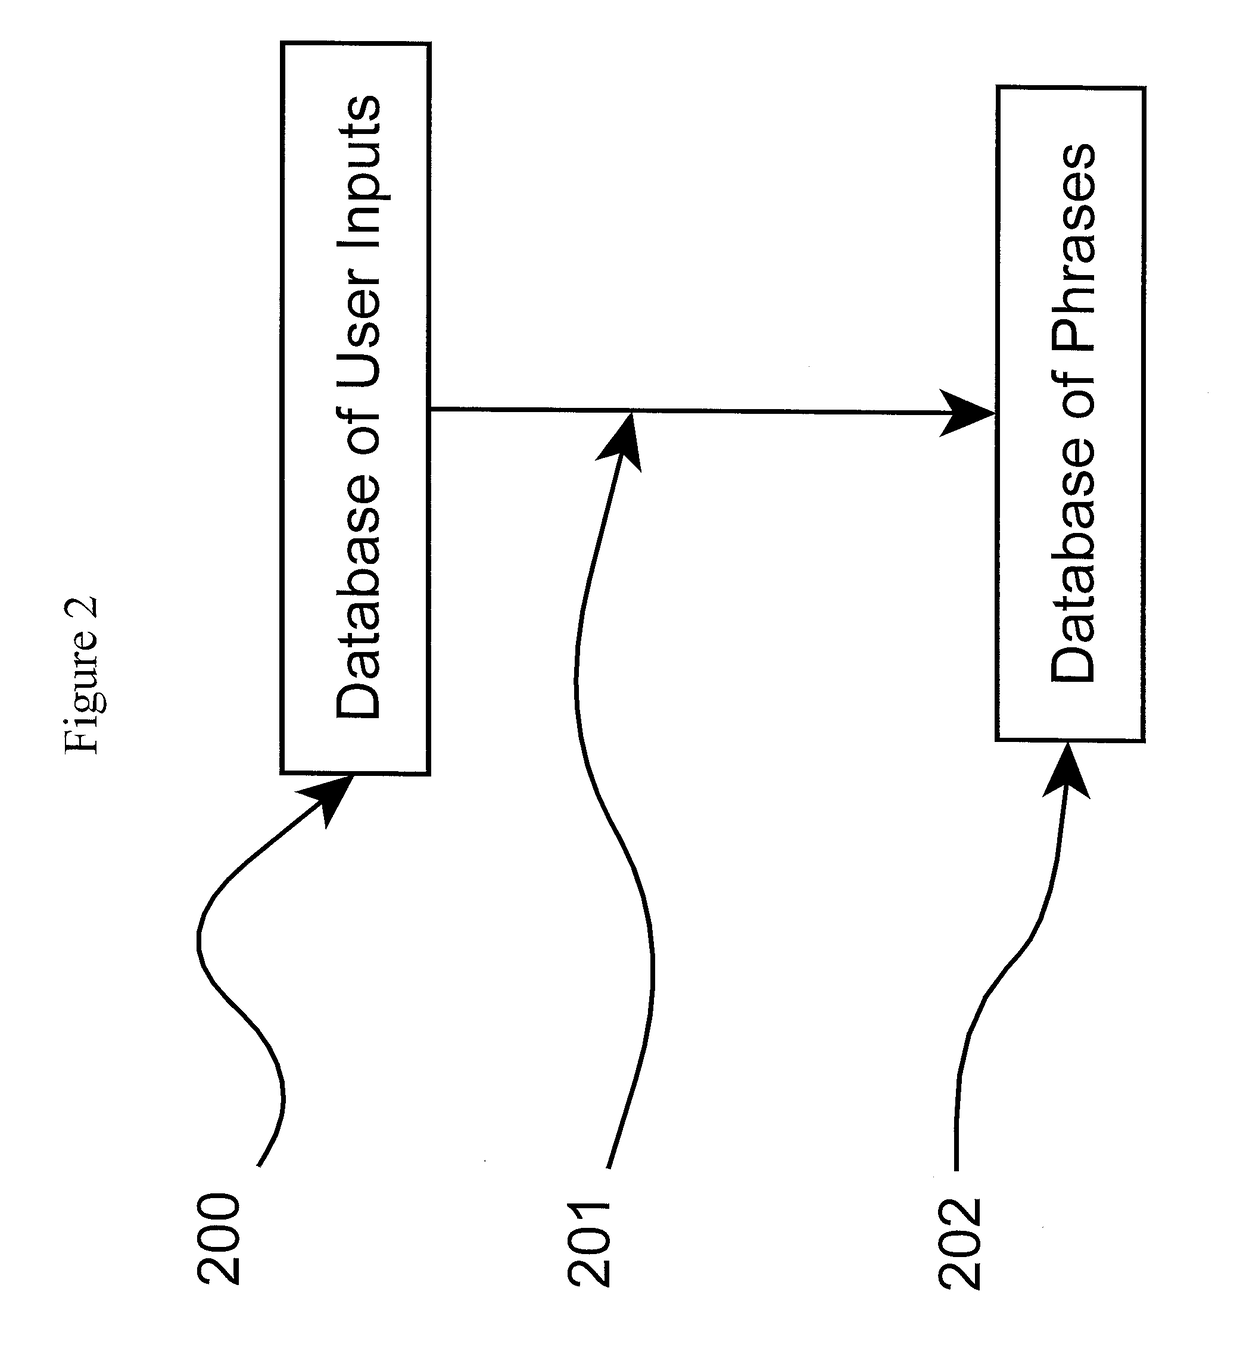 System and Methods for Narrative Patient Visit Note Generation